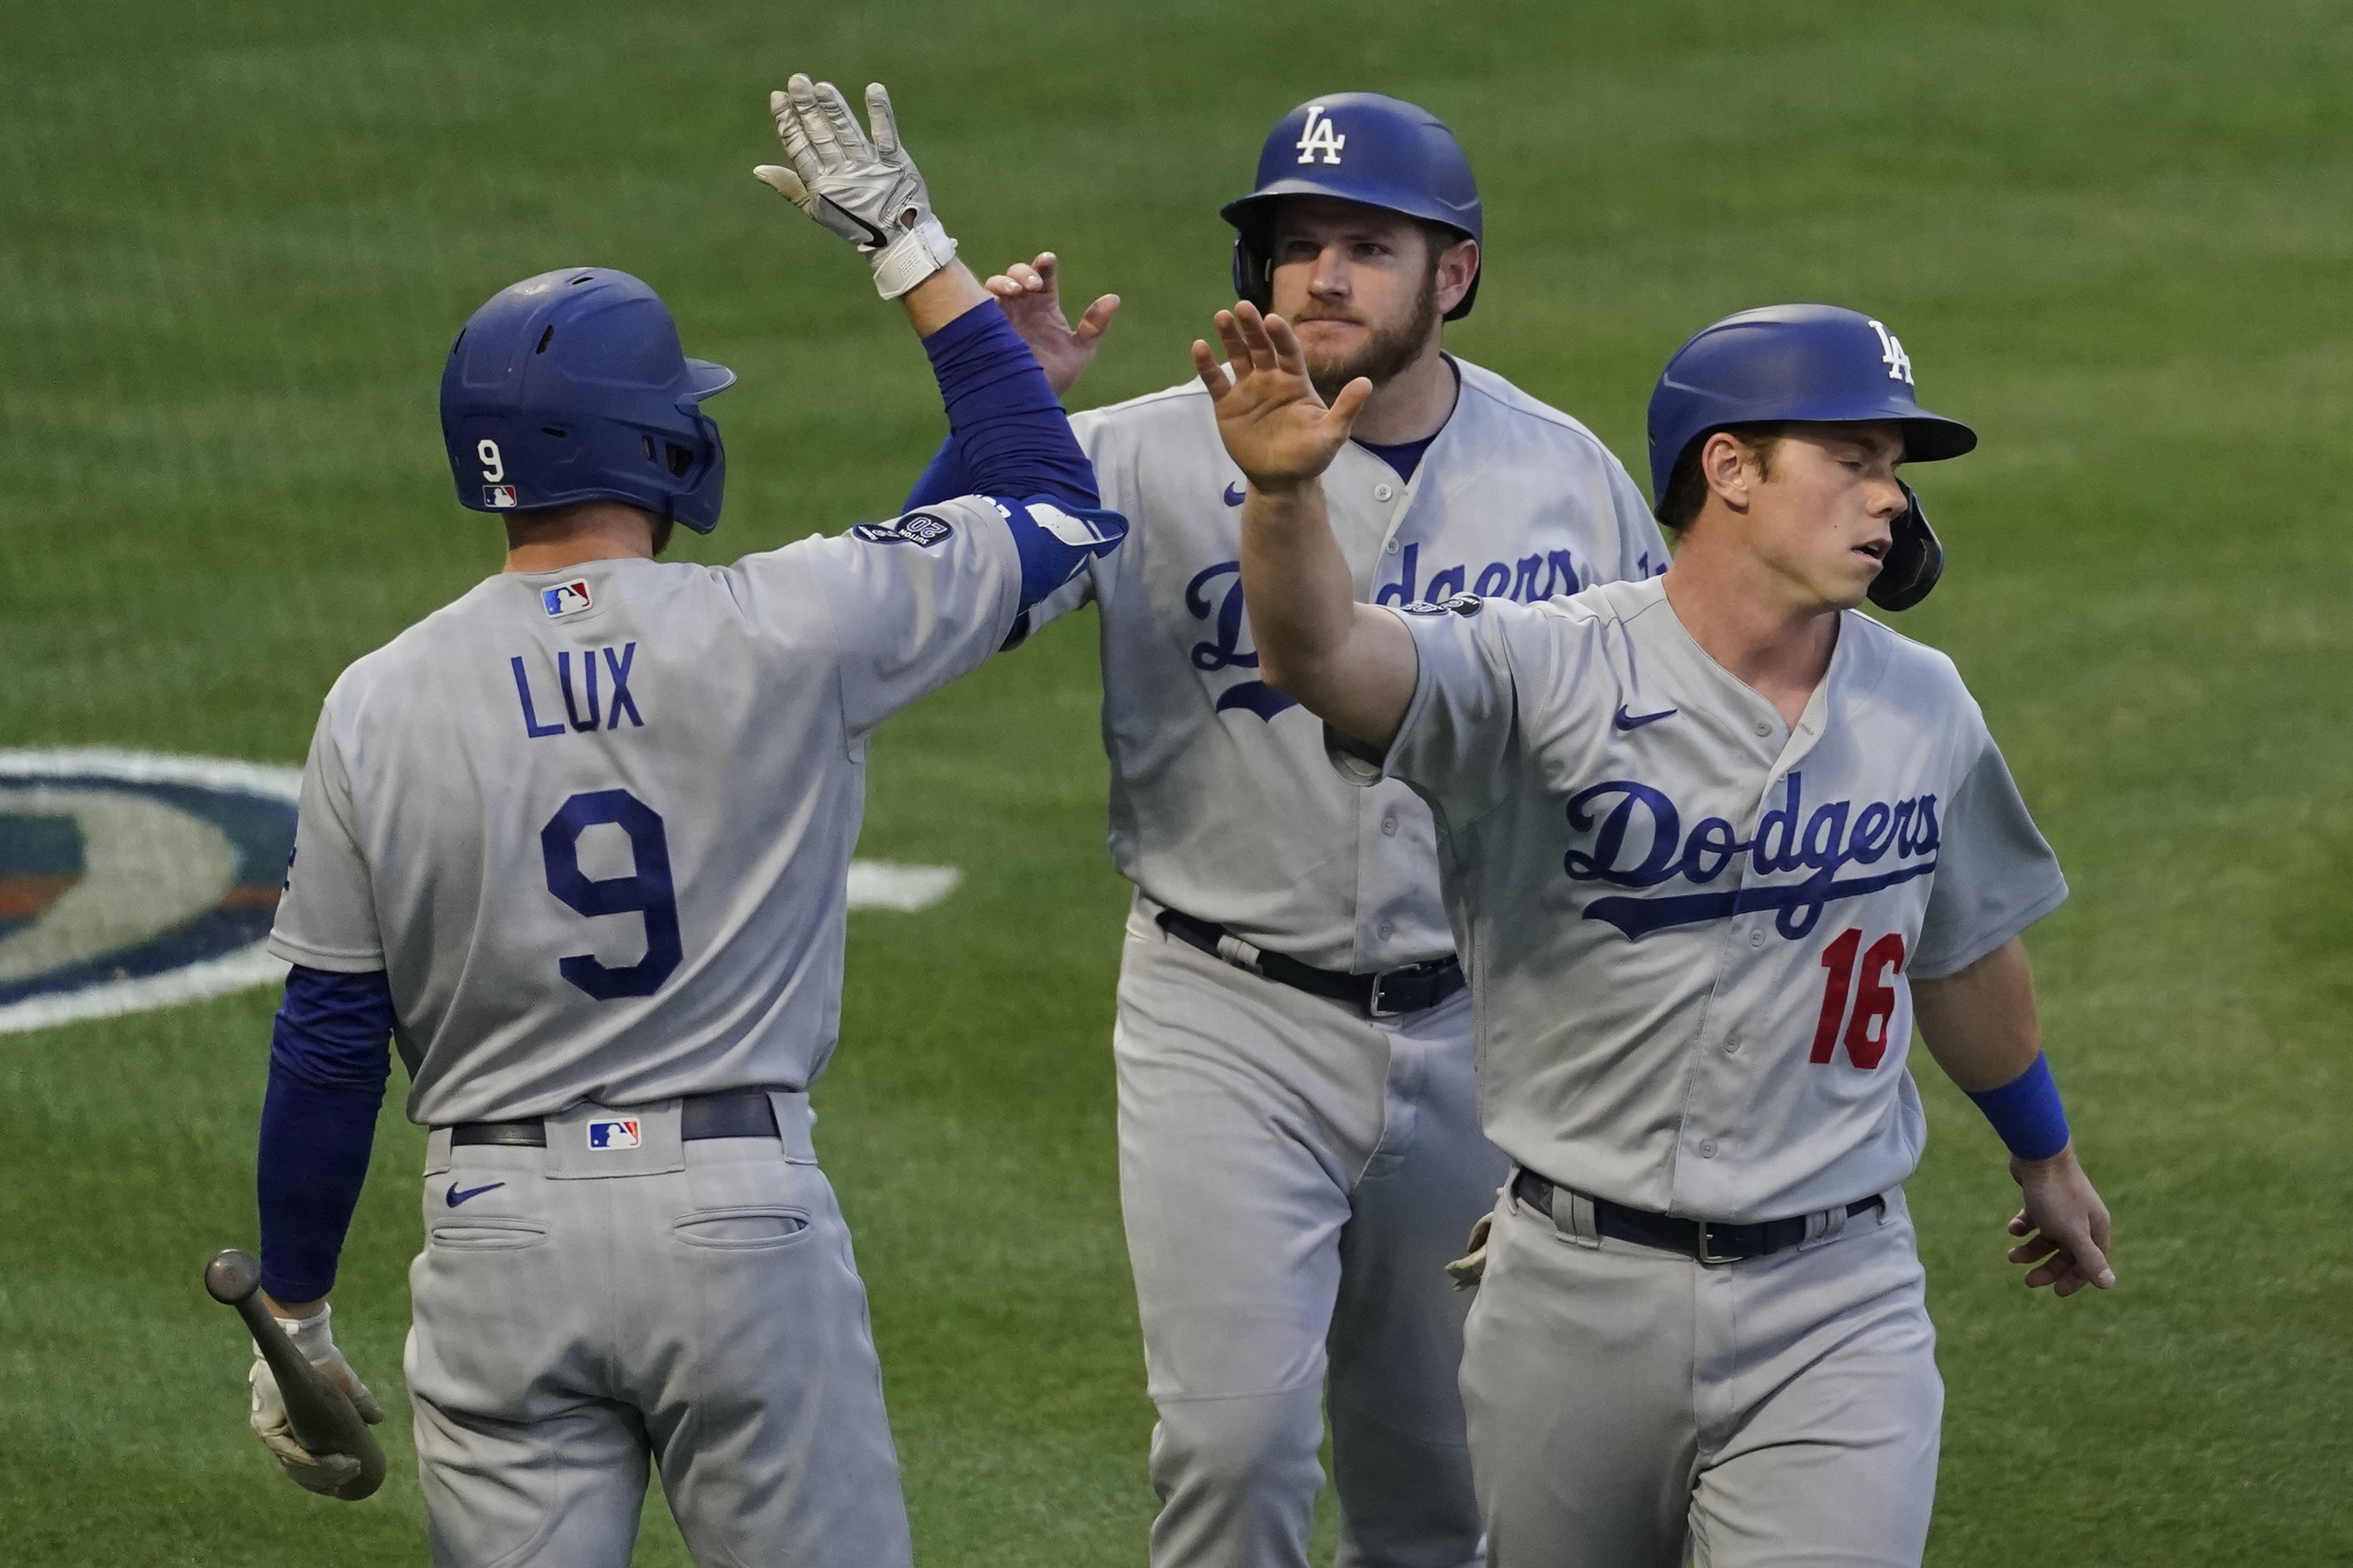 Dodgers: AJ Pollock's historically bad playoff stats are must-see